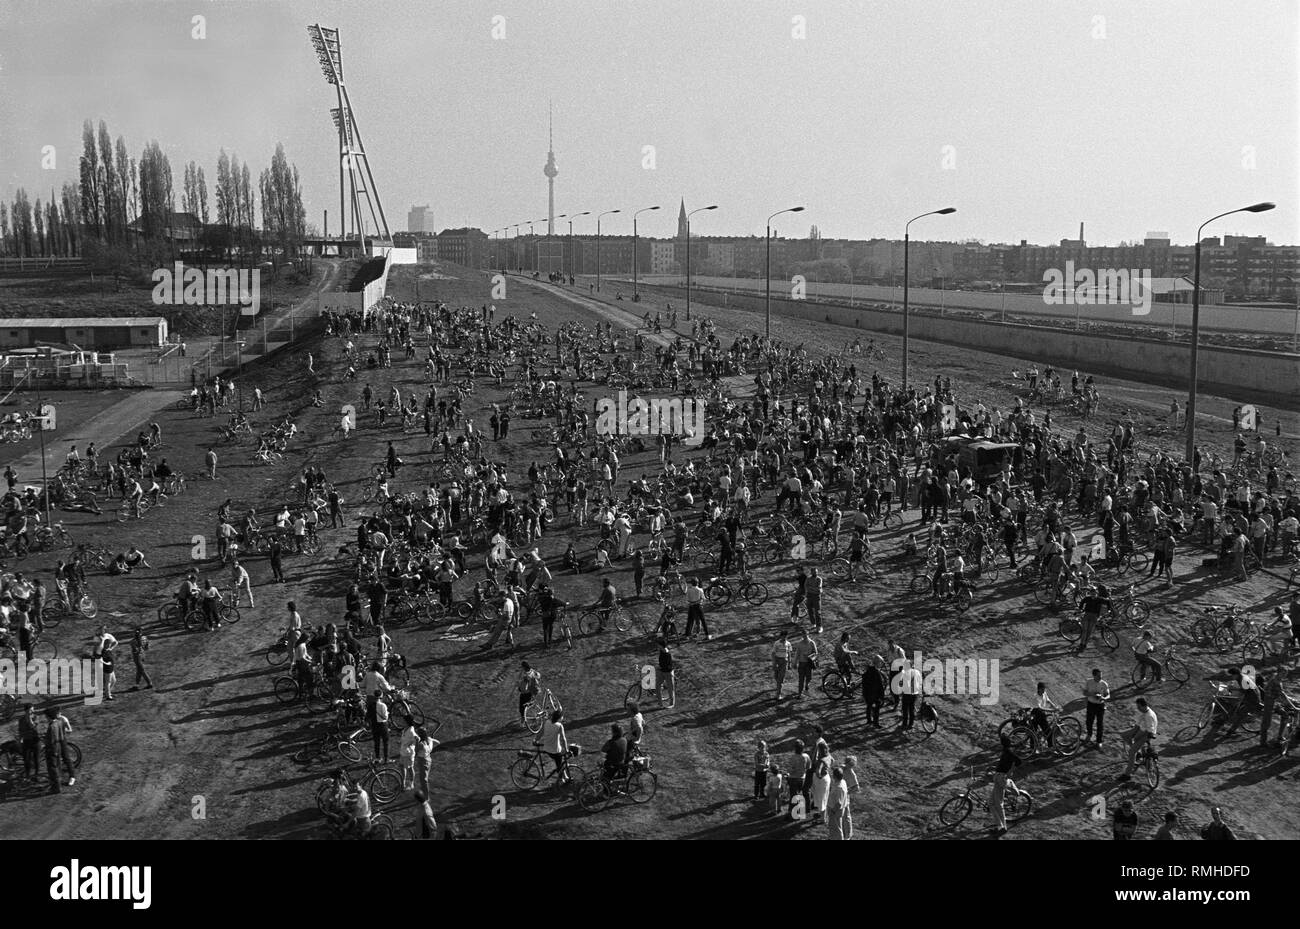 Proponents of the green belt during tree planting at the border strip at Falkplatz (later Mauerpark), after a bicycle demonstration from the Rotes Rathaus to Falkplatz. To the right the border installations, in the background the Forum Hotel and the TV Tower, Germany, Prenzlauer Berg, Berlin, April 1, 1990. Stock Photo